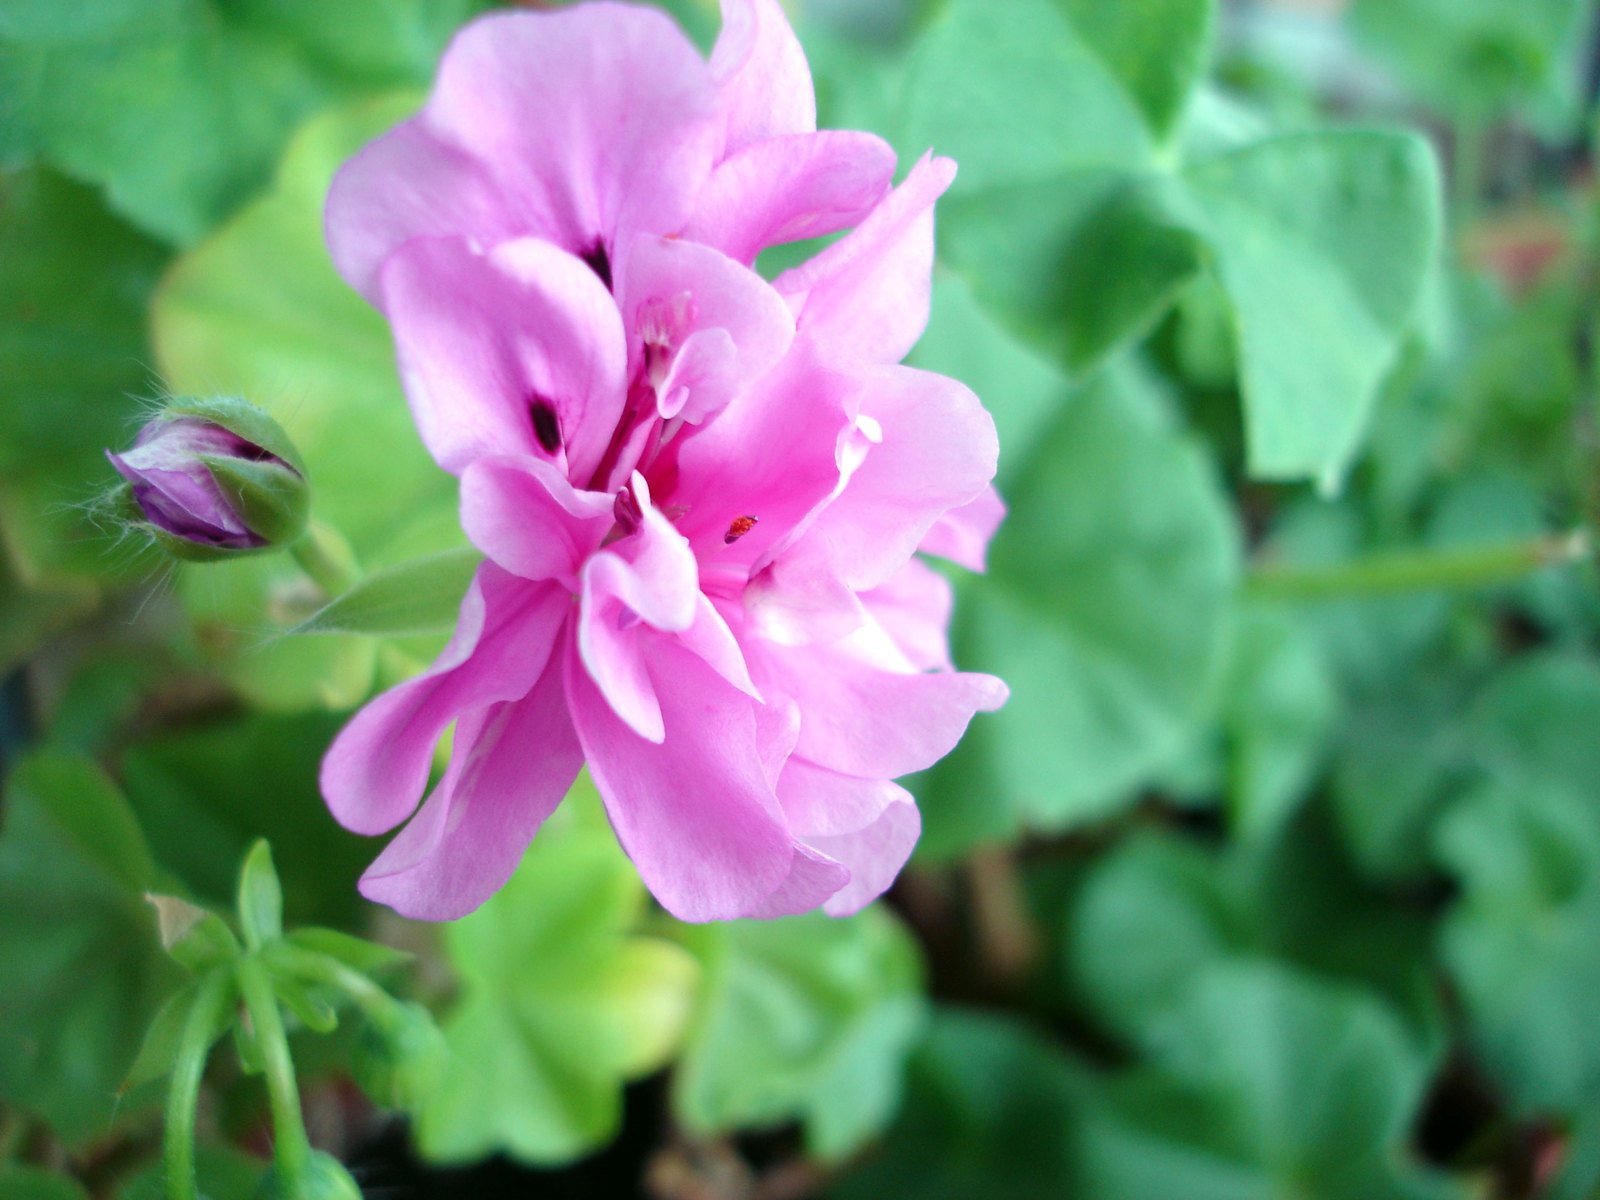 a flower with green leaves and pink petals